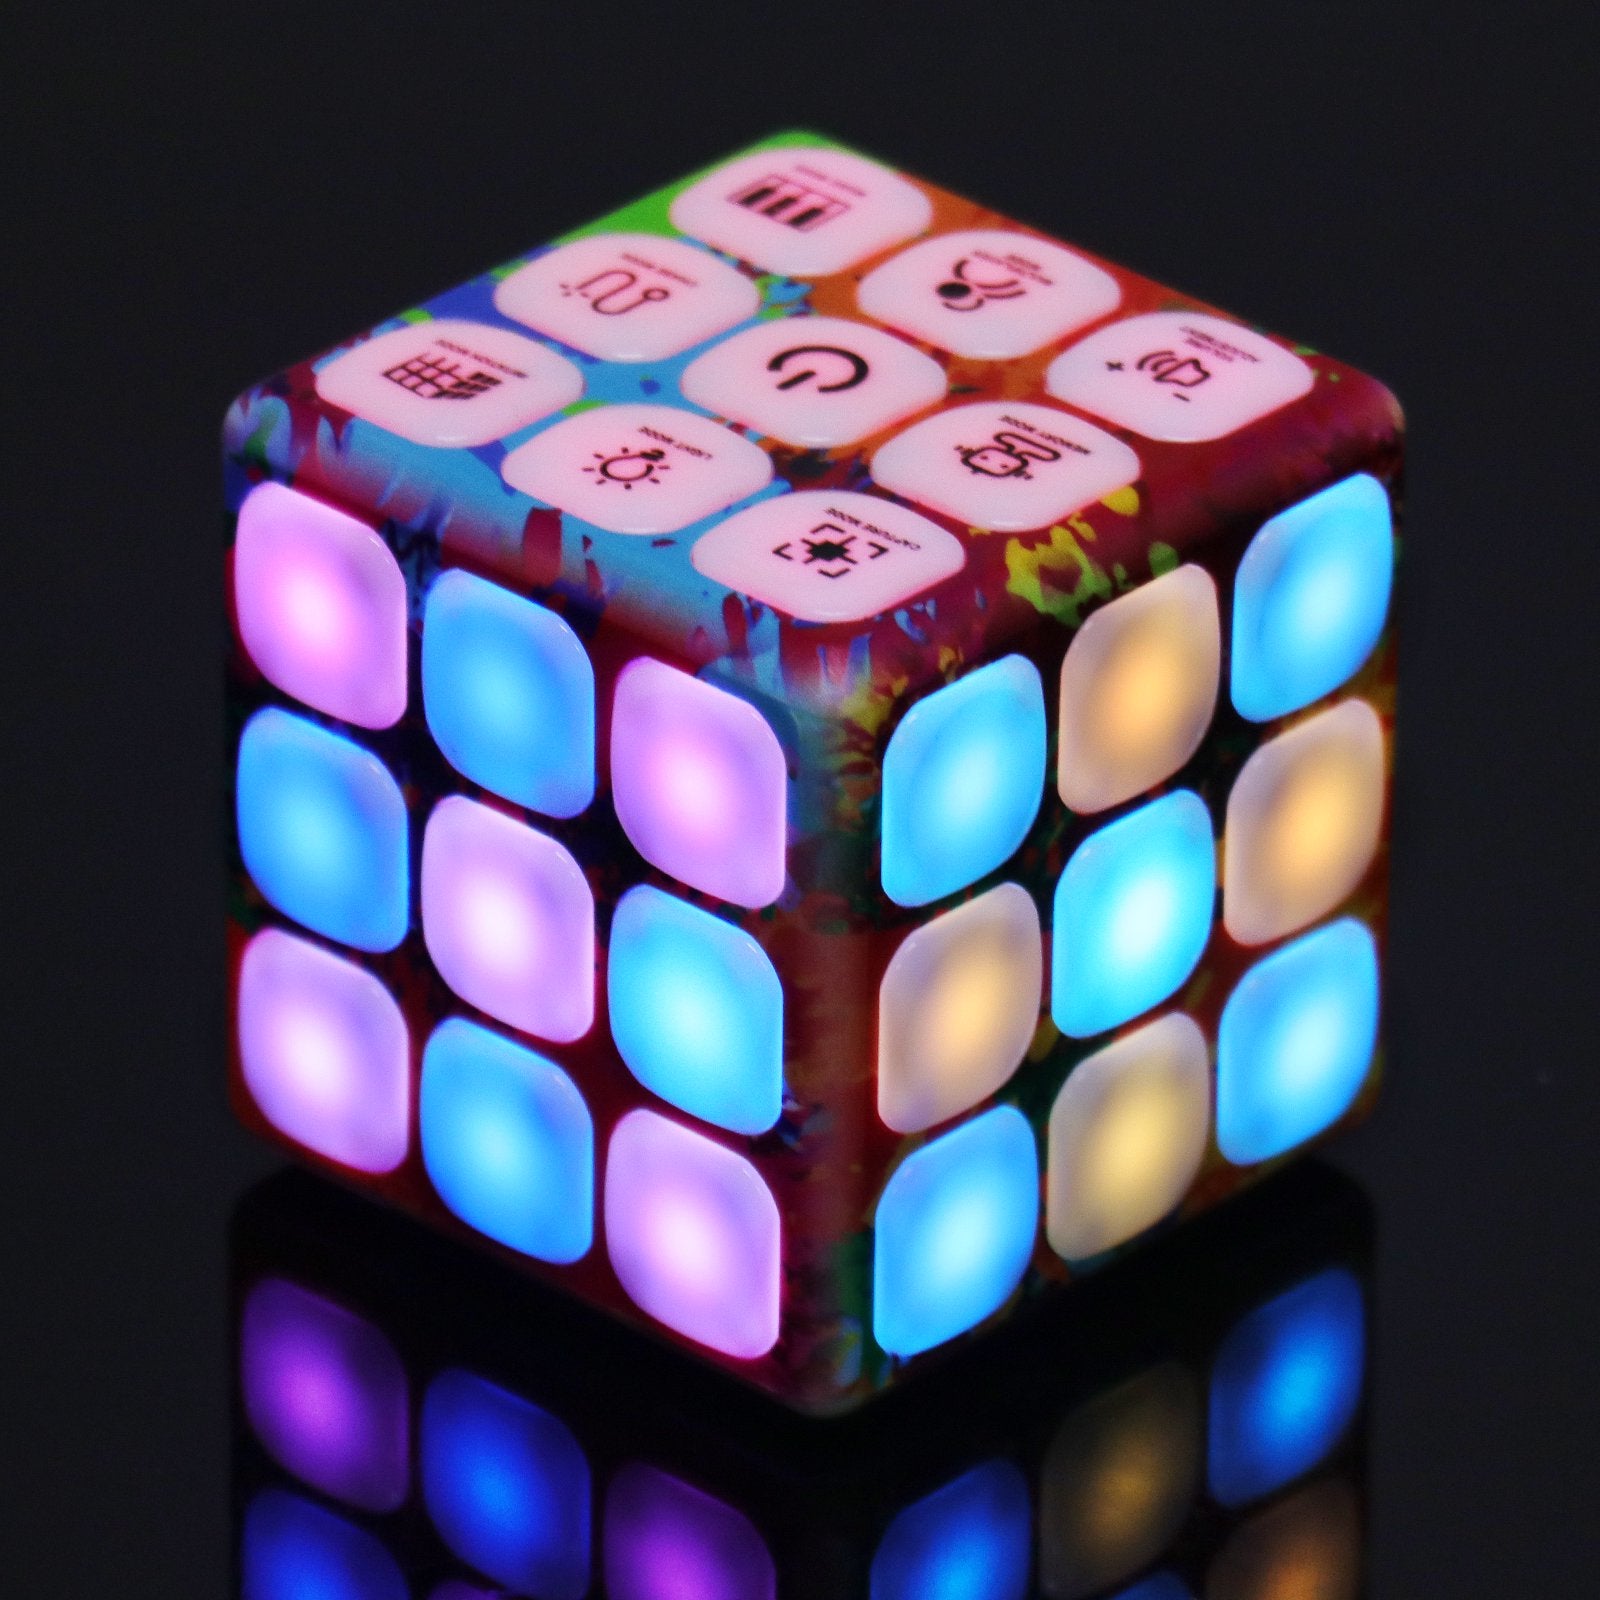 Blossom Cool Cubik LED Flashing Cube Memory Game - 5 Brain Memory Games for Kids And Children's Stress Relief And Full Entertainment